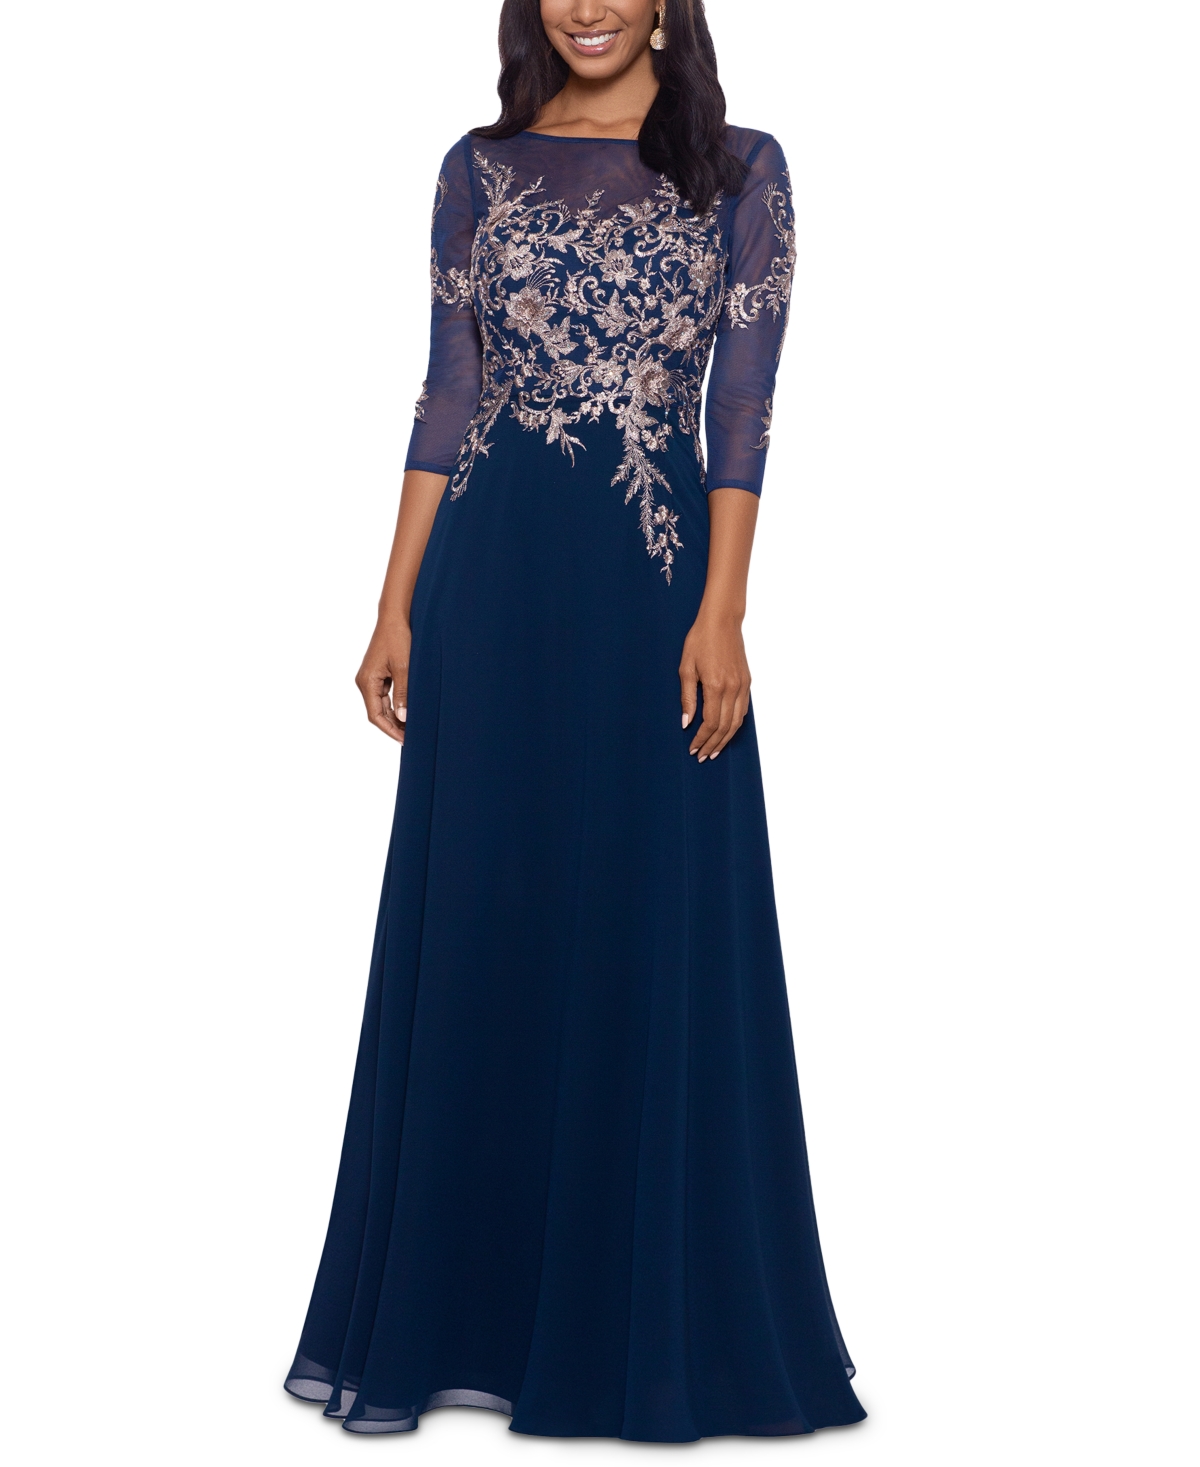 1940s Evening, Prom, Party, Formal, Ball Gowns Betsy  Adam Embroidered 34-Sleeve Gown - NavyRose $299.00 AT vintagedancer.com